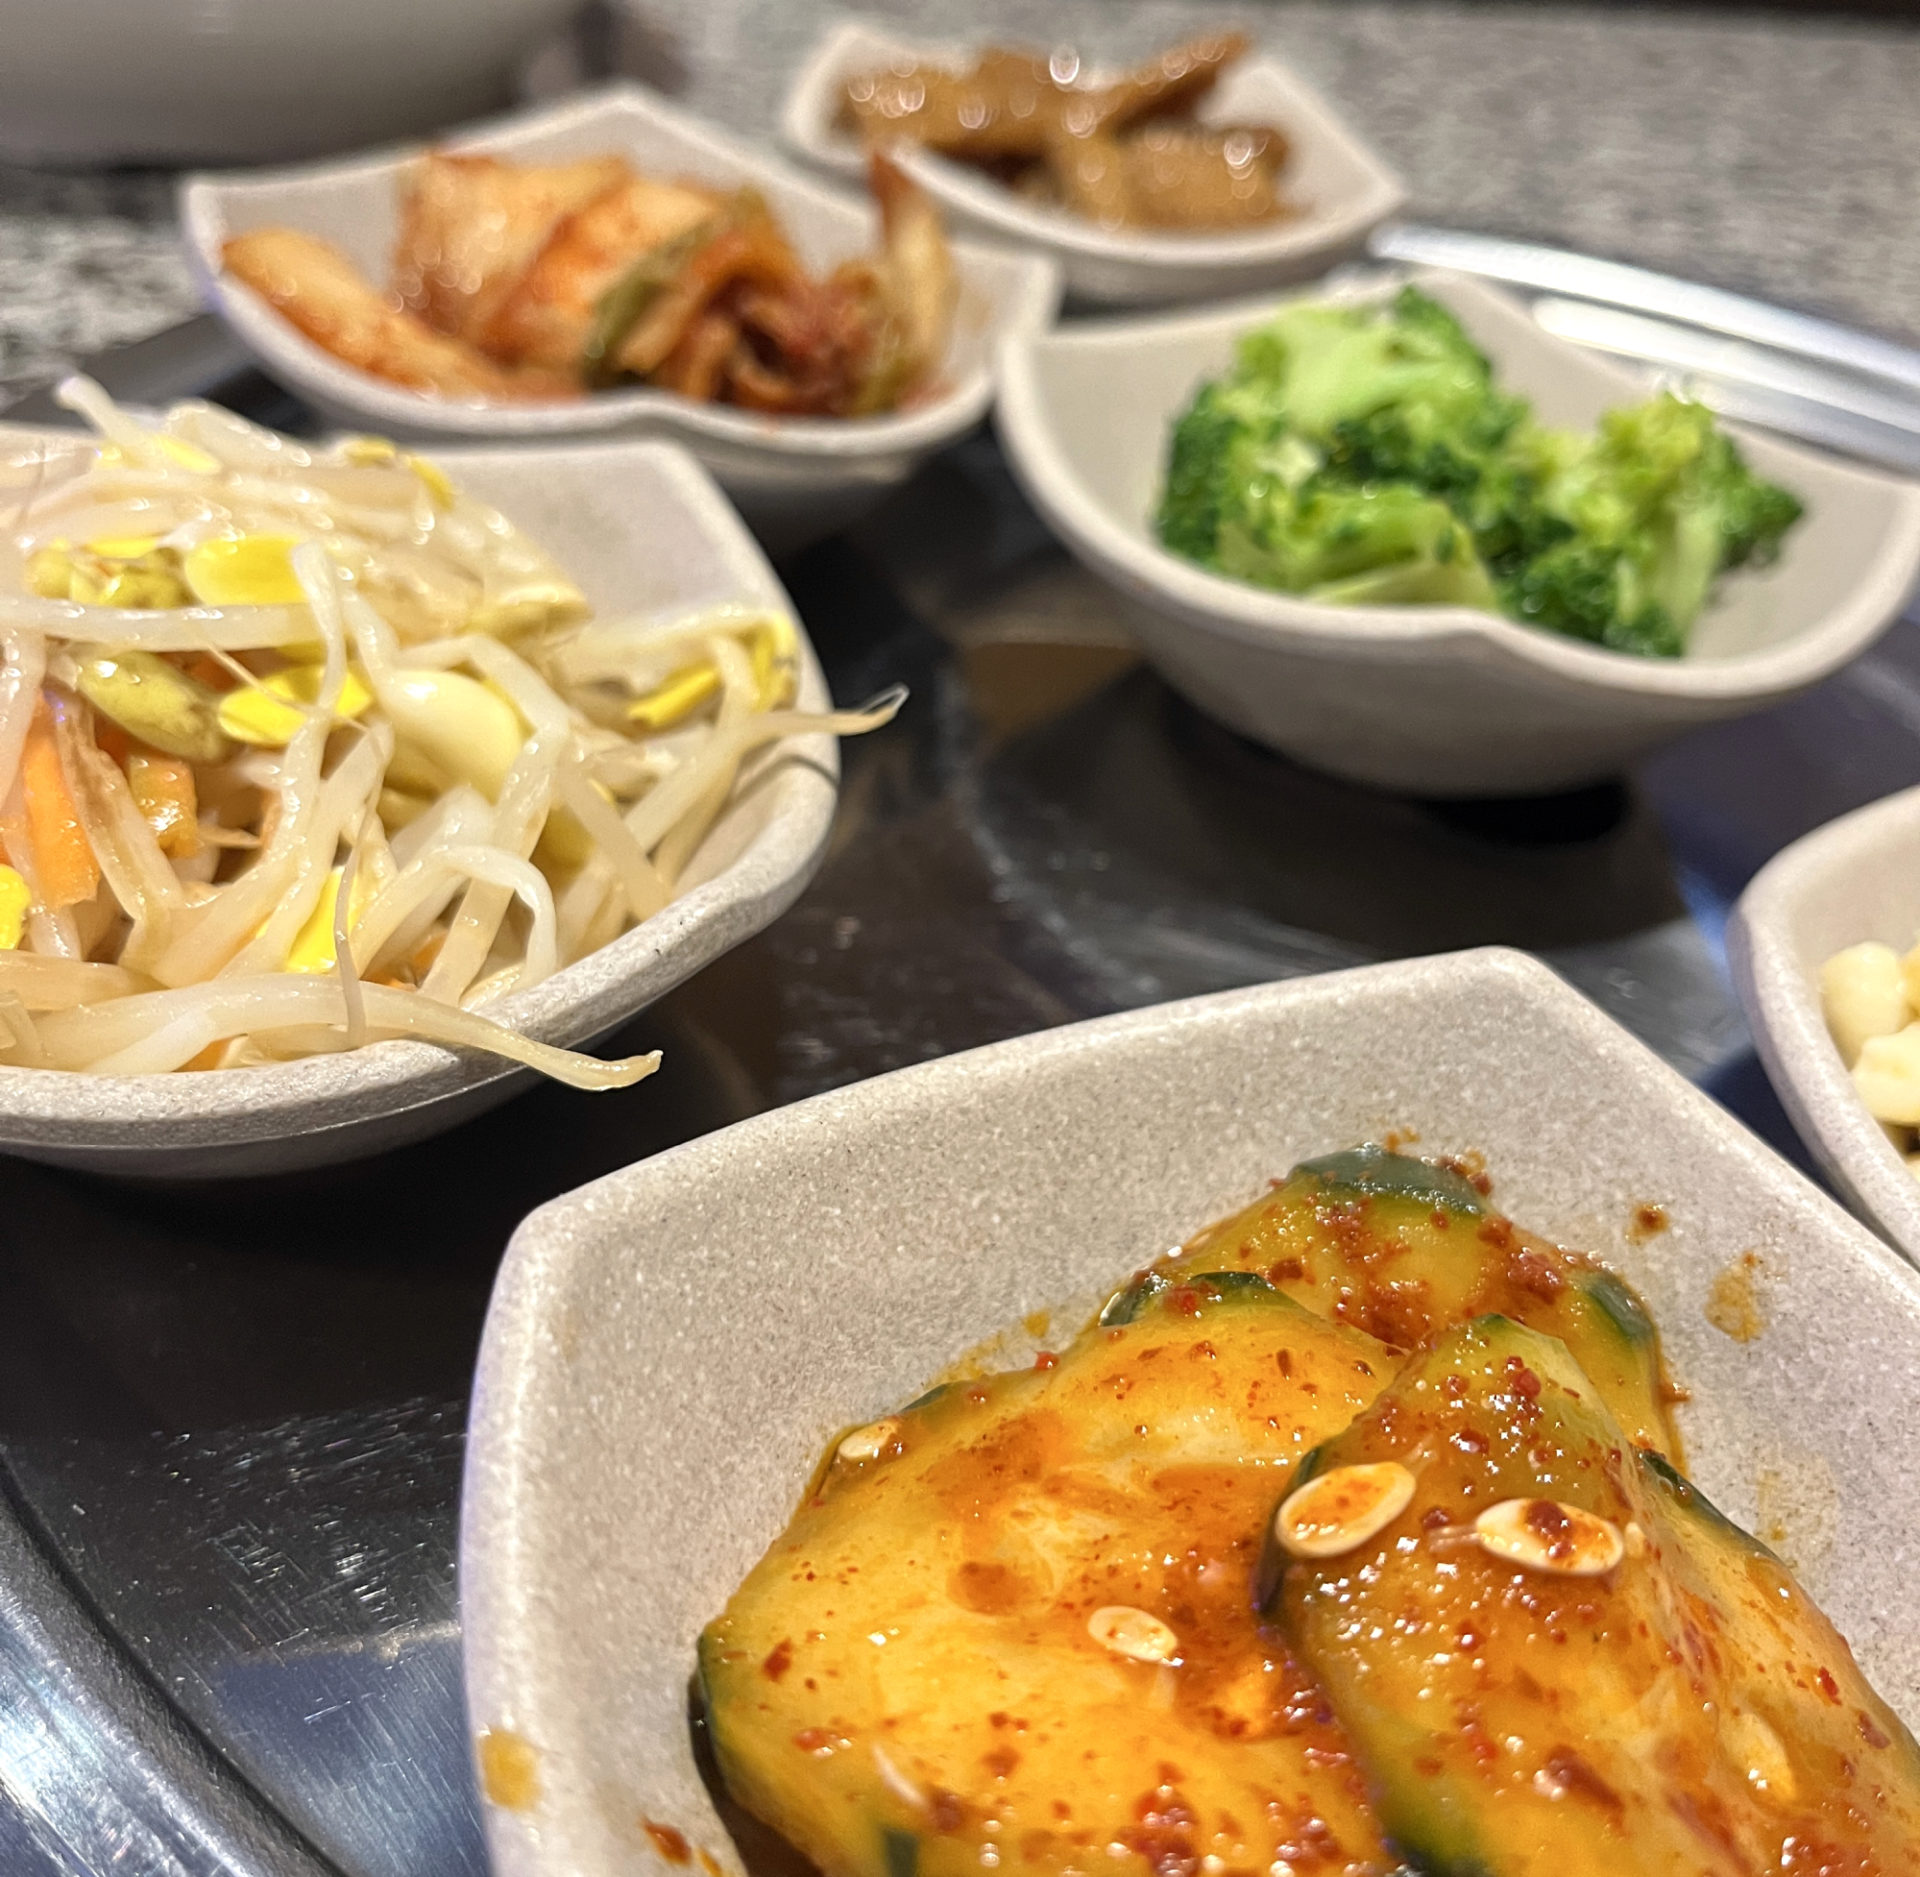 Banchan at Star BBQ: small bowls of side dishes including kimchi cucumber, pickled sprouts, kimchi, broccoli salad, and fish cakes.